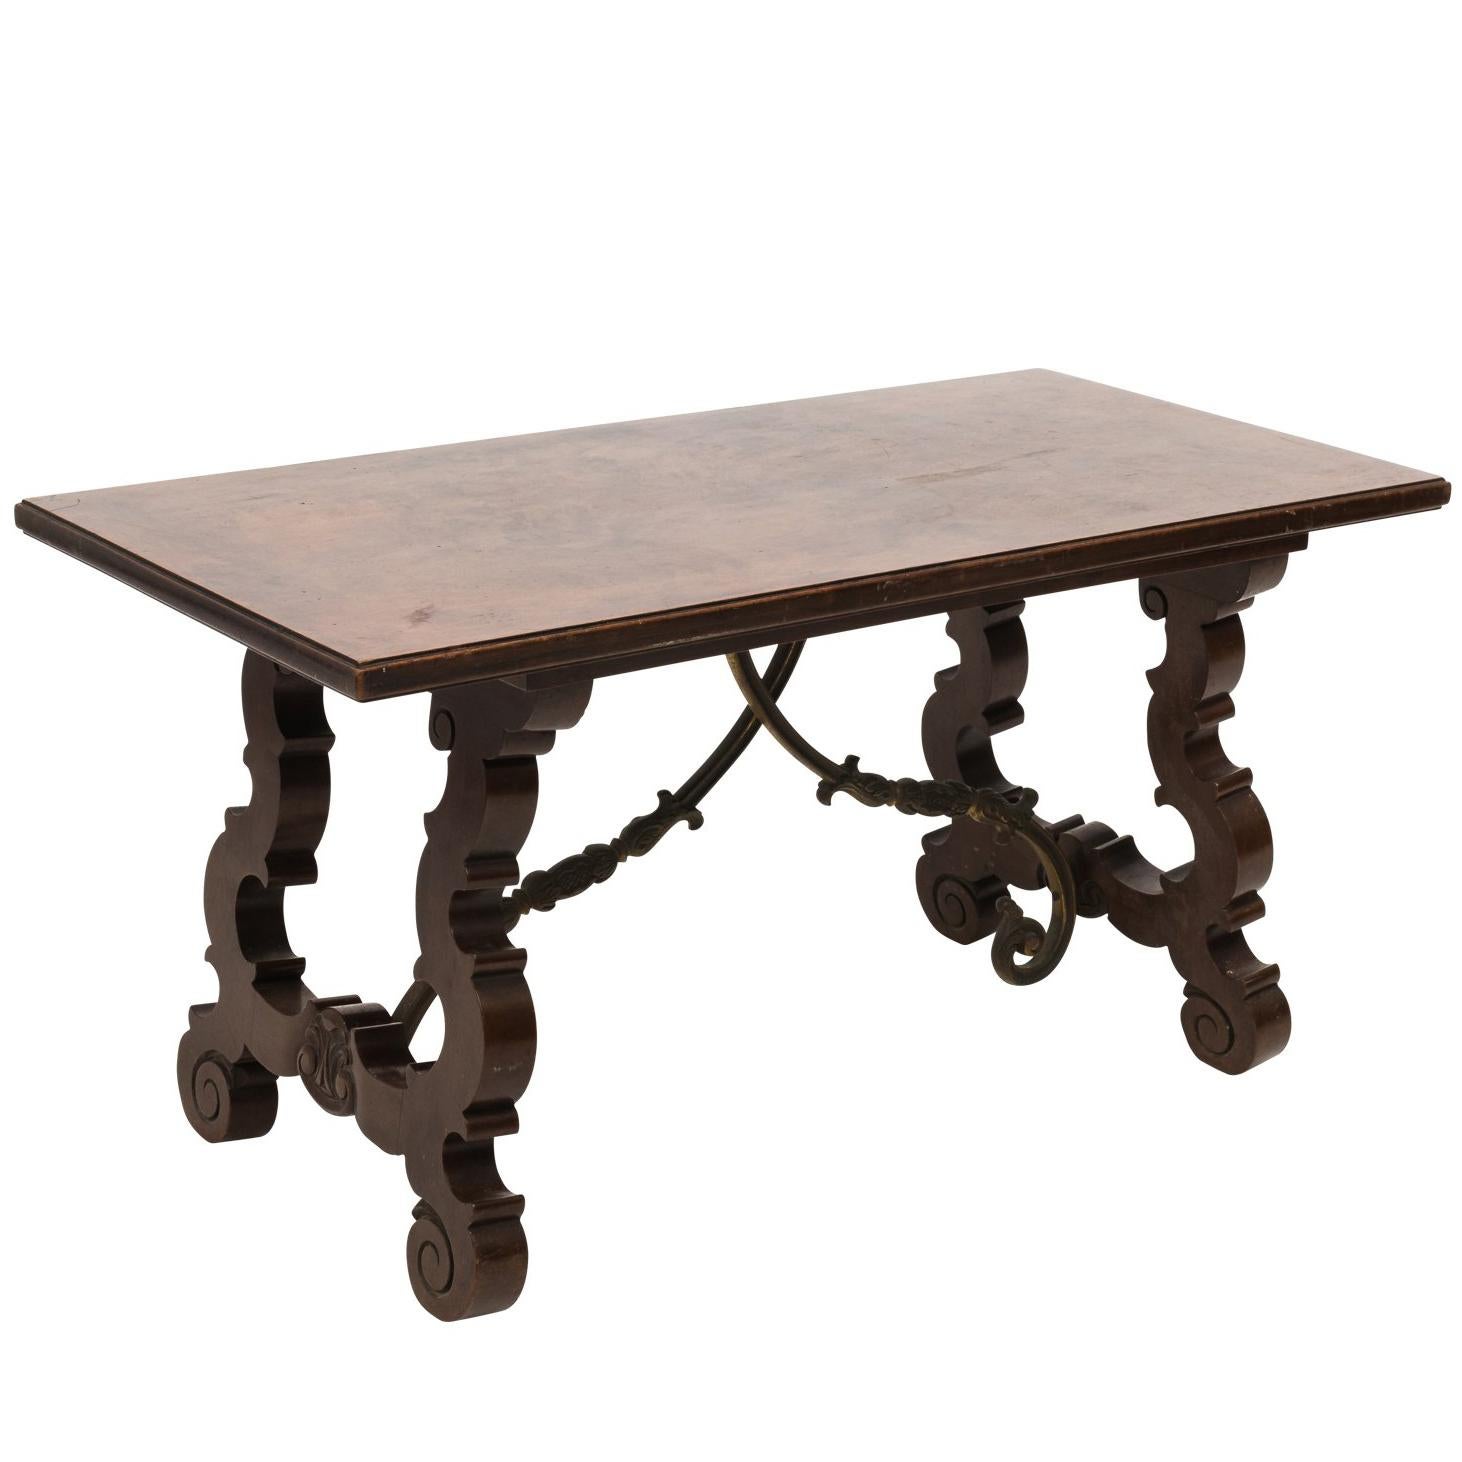 Italian Renaissance Style Walnut and Brass Trestle Coffee Table, circa 1950s For Sale